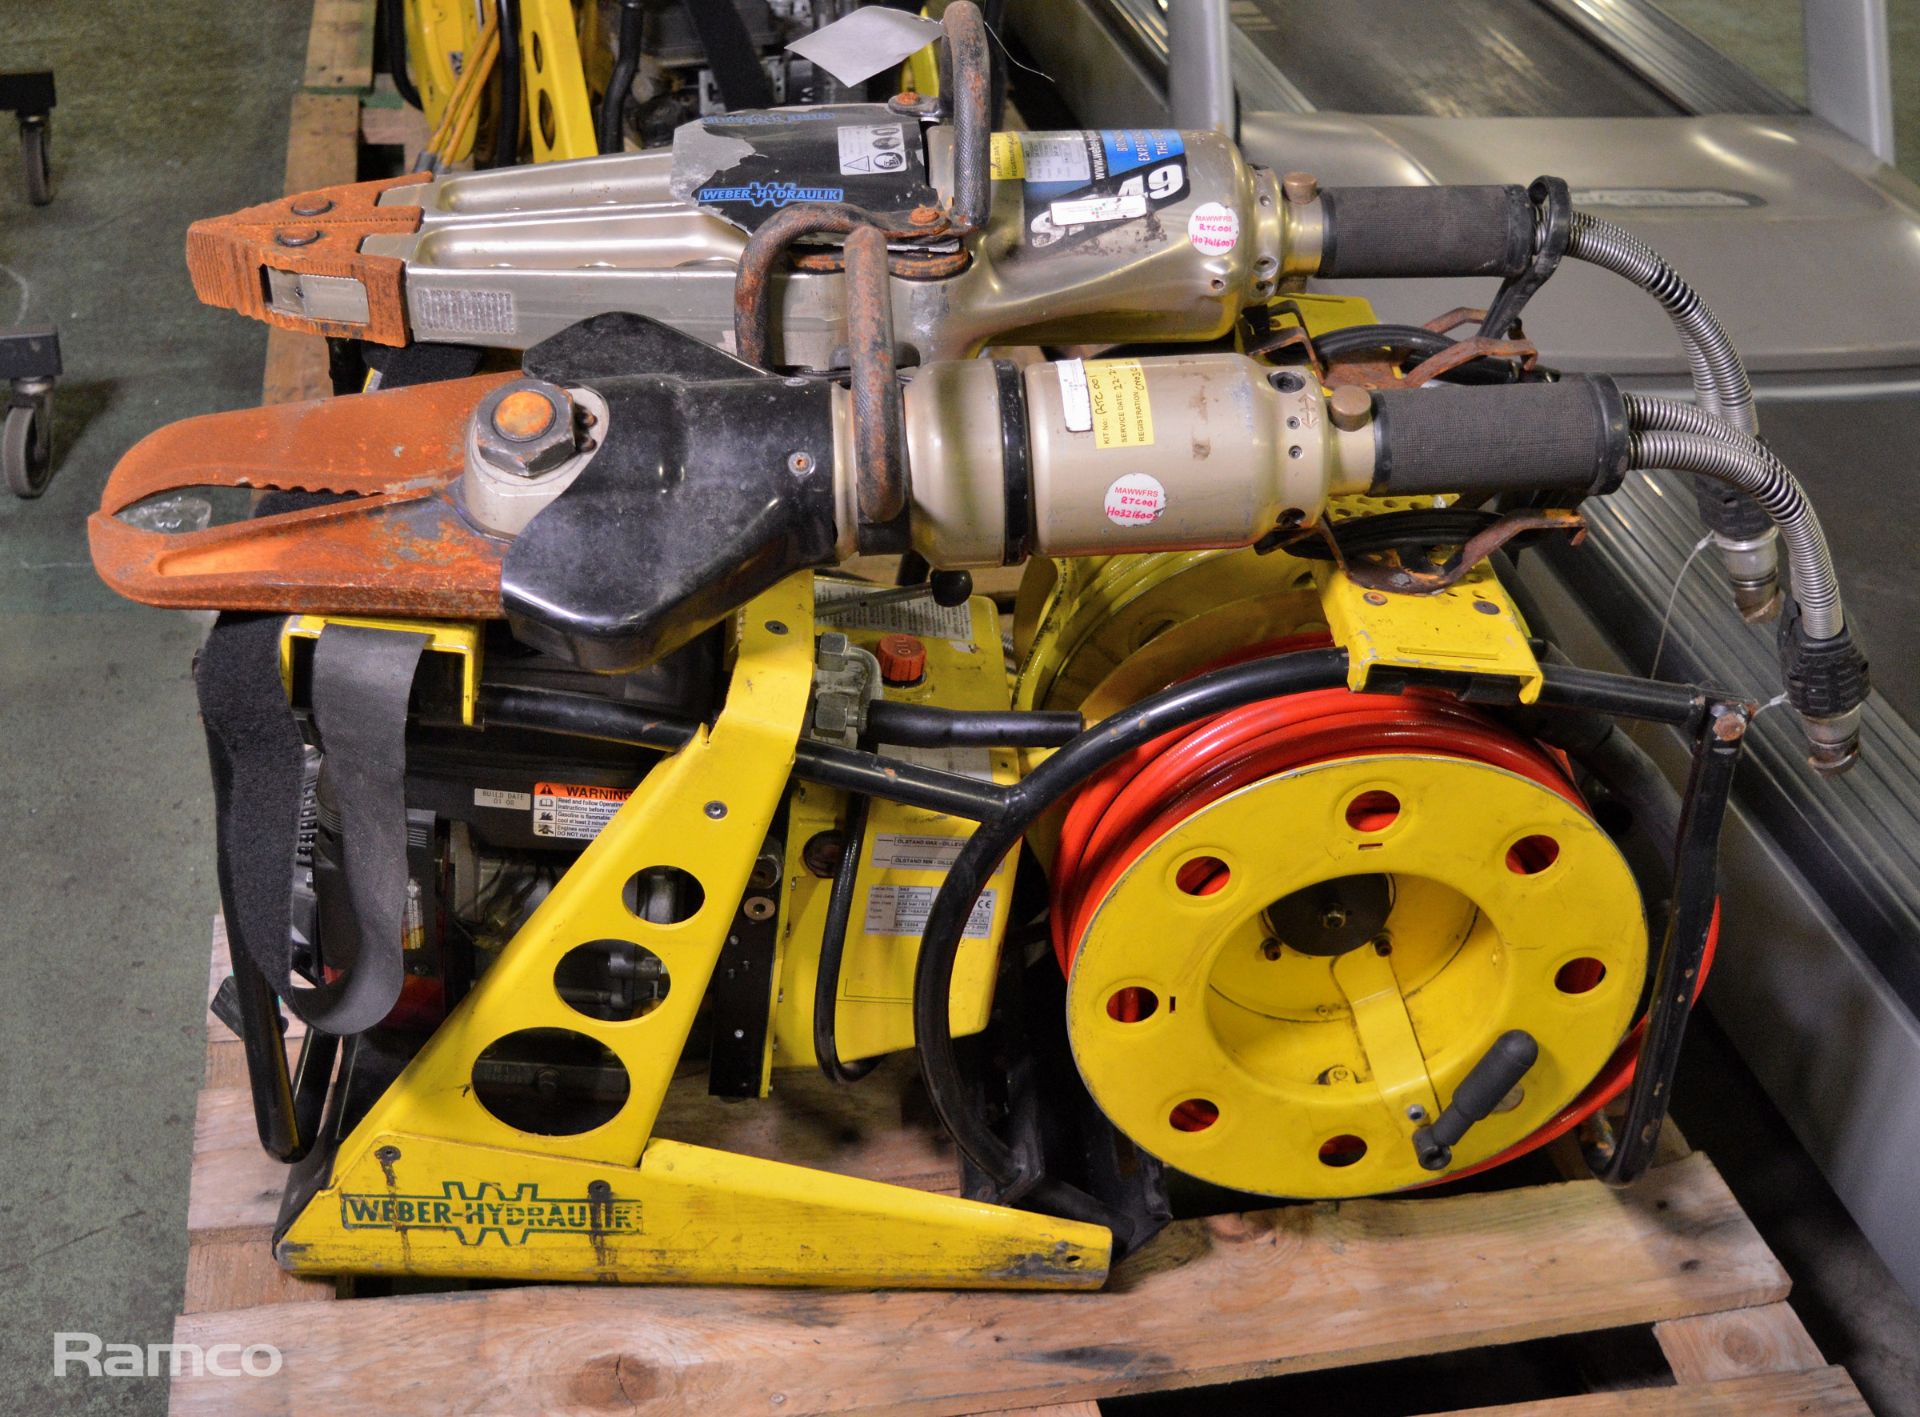 Weber Hydraulic Rescue Equipment & Accessories - Cutter, Spreader, Ram, Power pack & hoses - Image 2 of 9